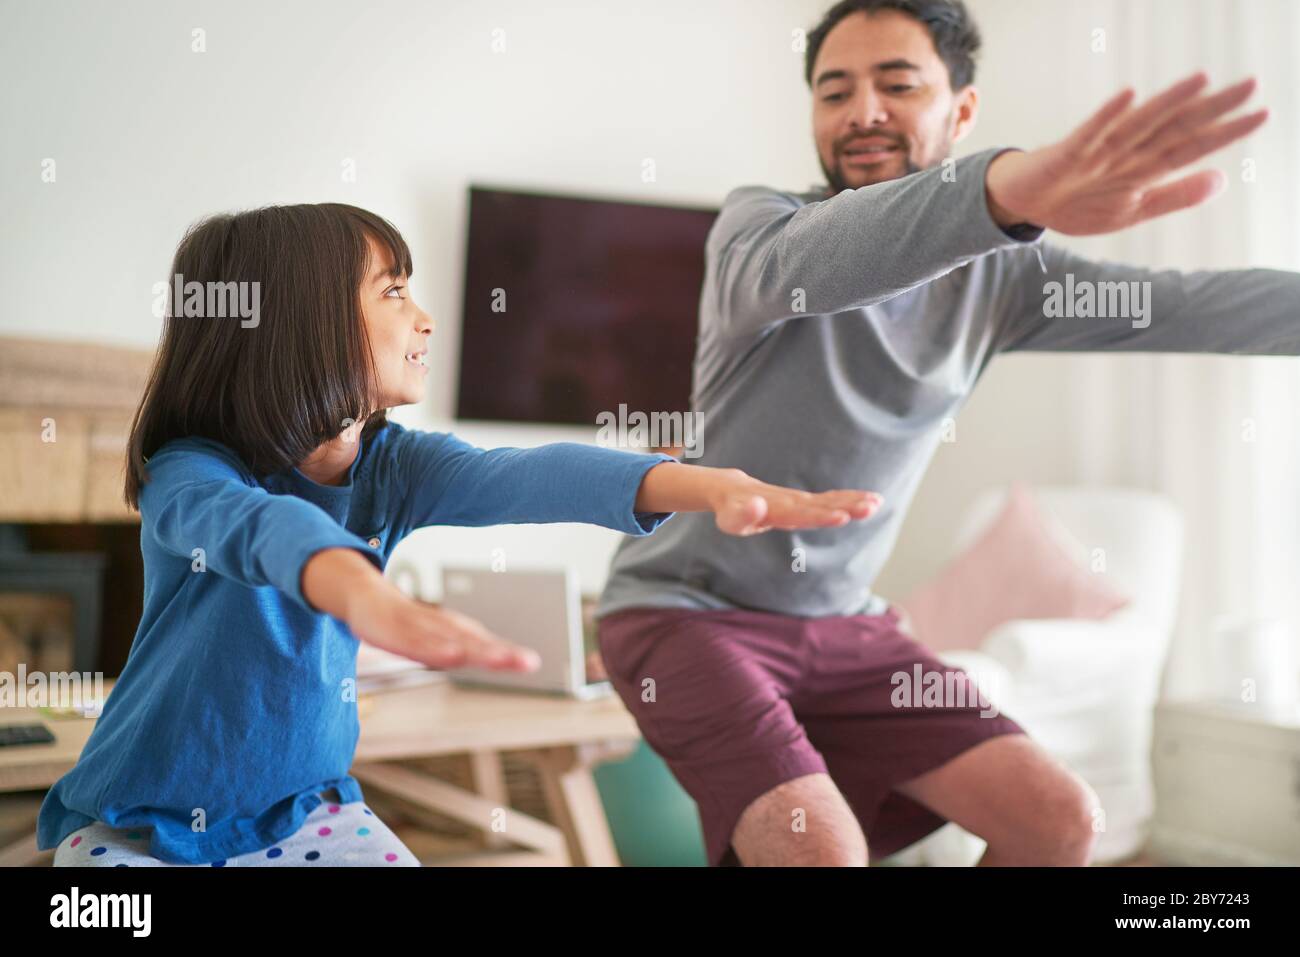 Father and daughter exercising doing squats in living room Stock Photo